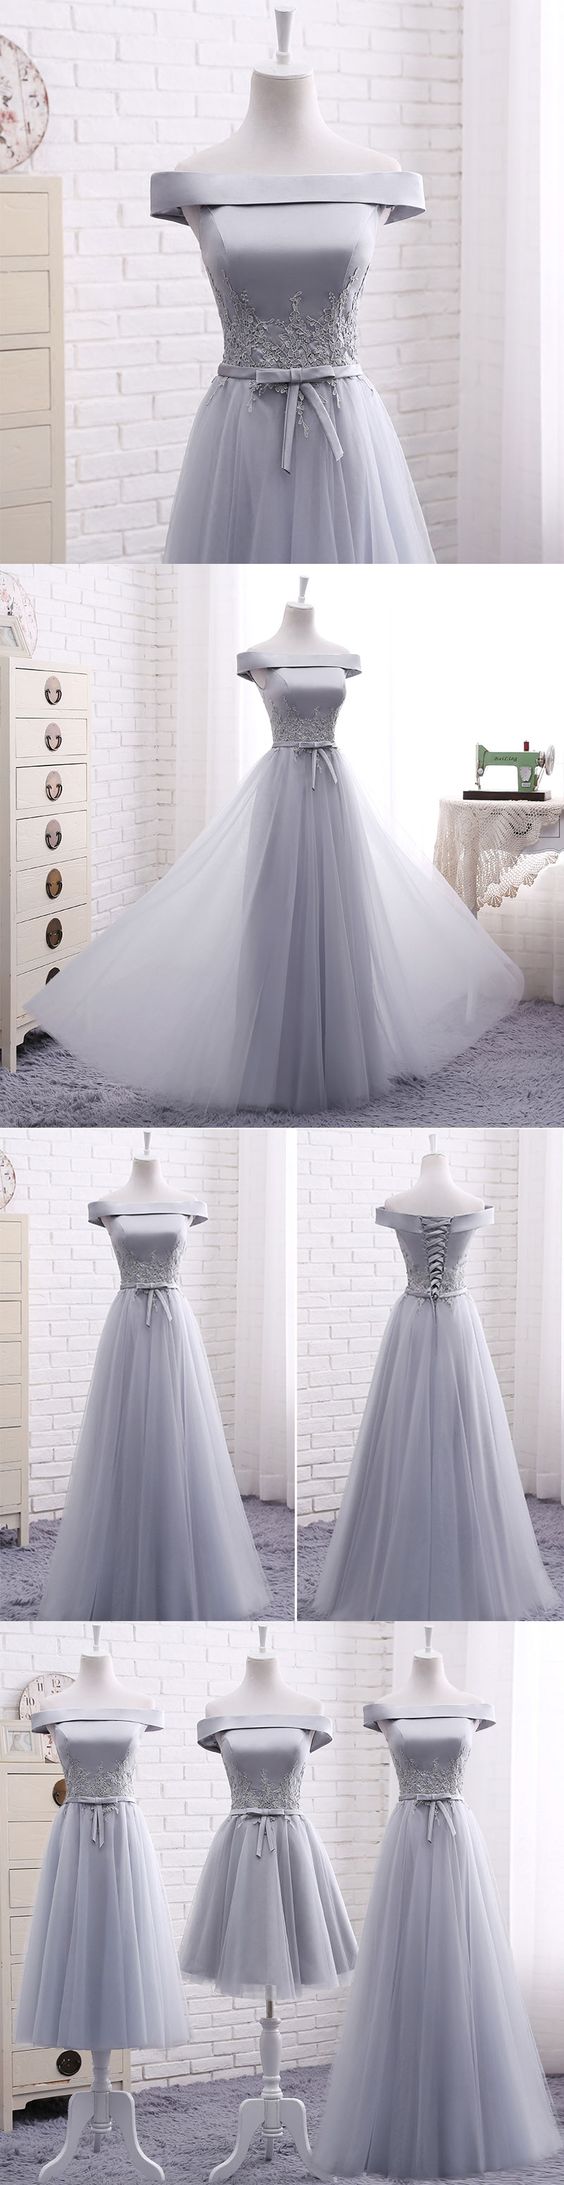 Gray Tulle Long Senior Prom Dress, Simple Bridesmaid Dress Sexy Prom Dresses,evening Gowns,pd14096